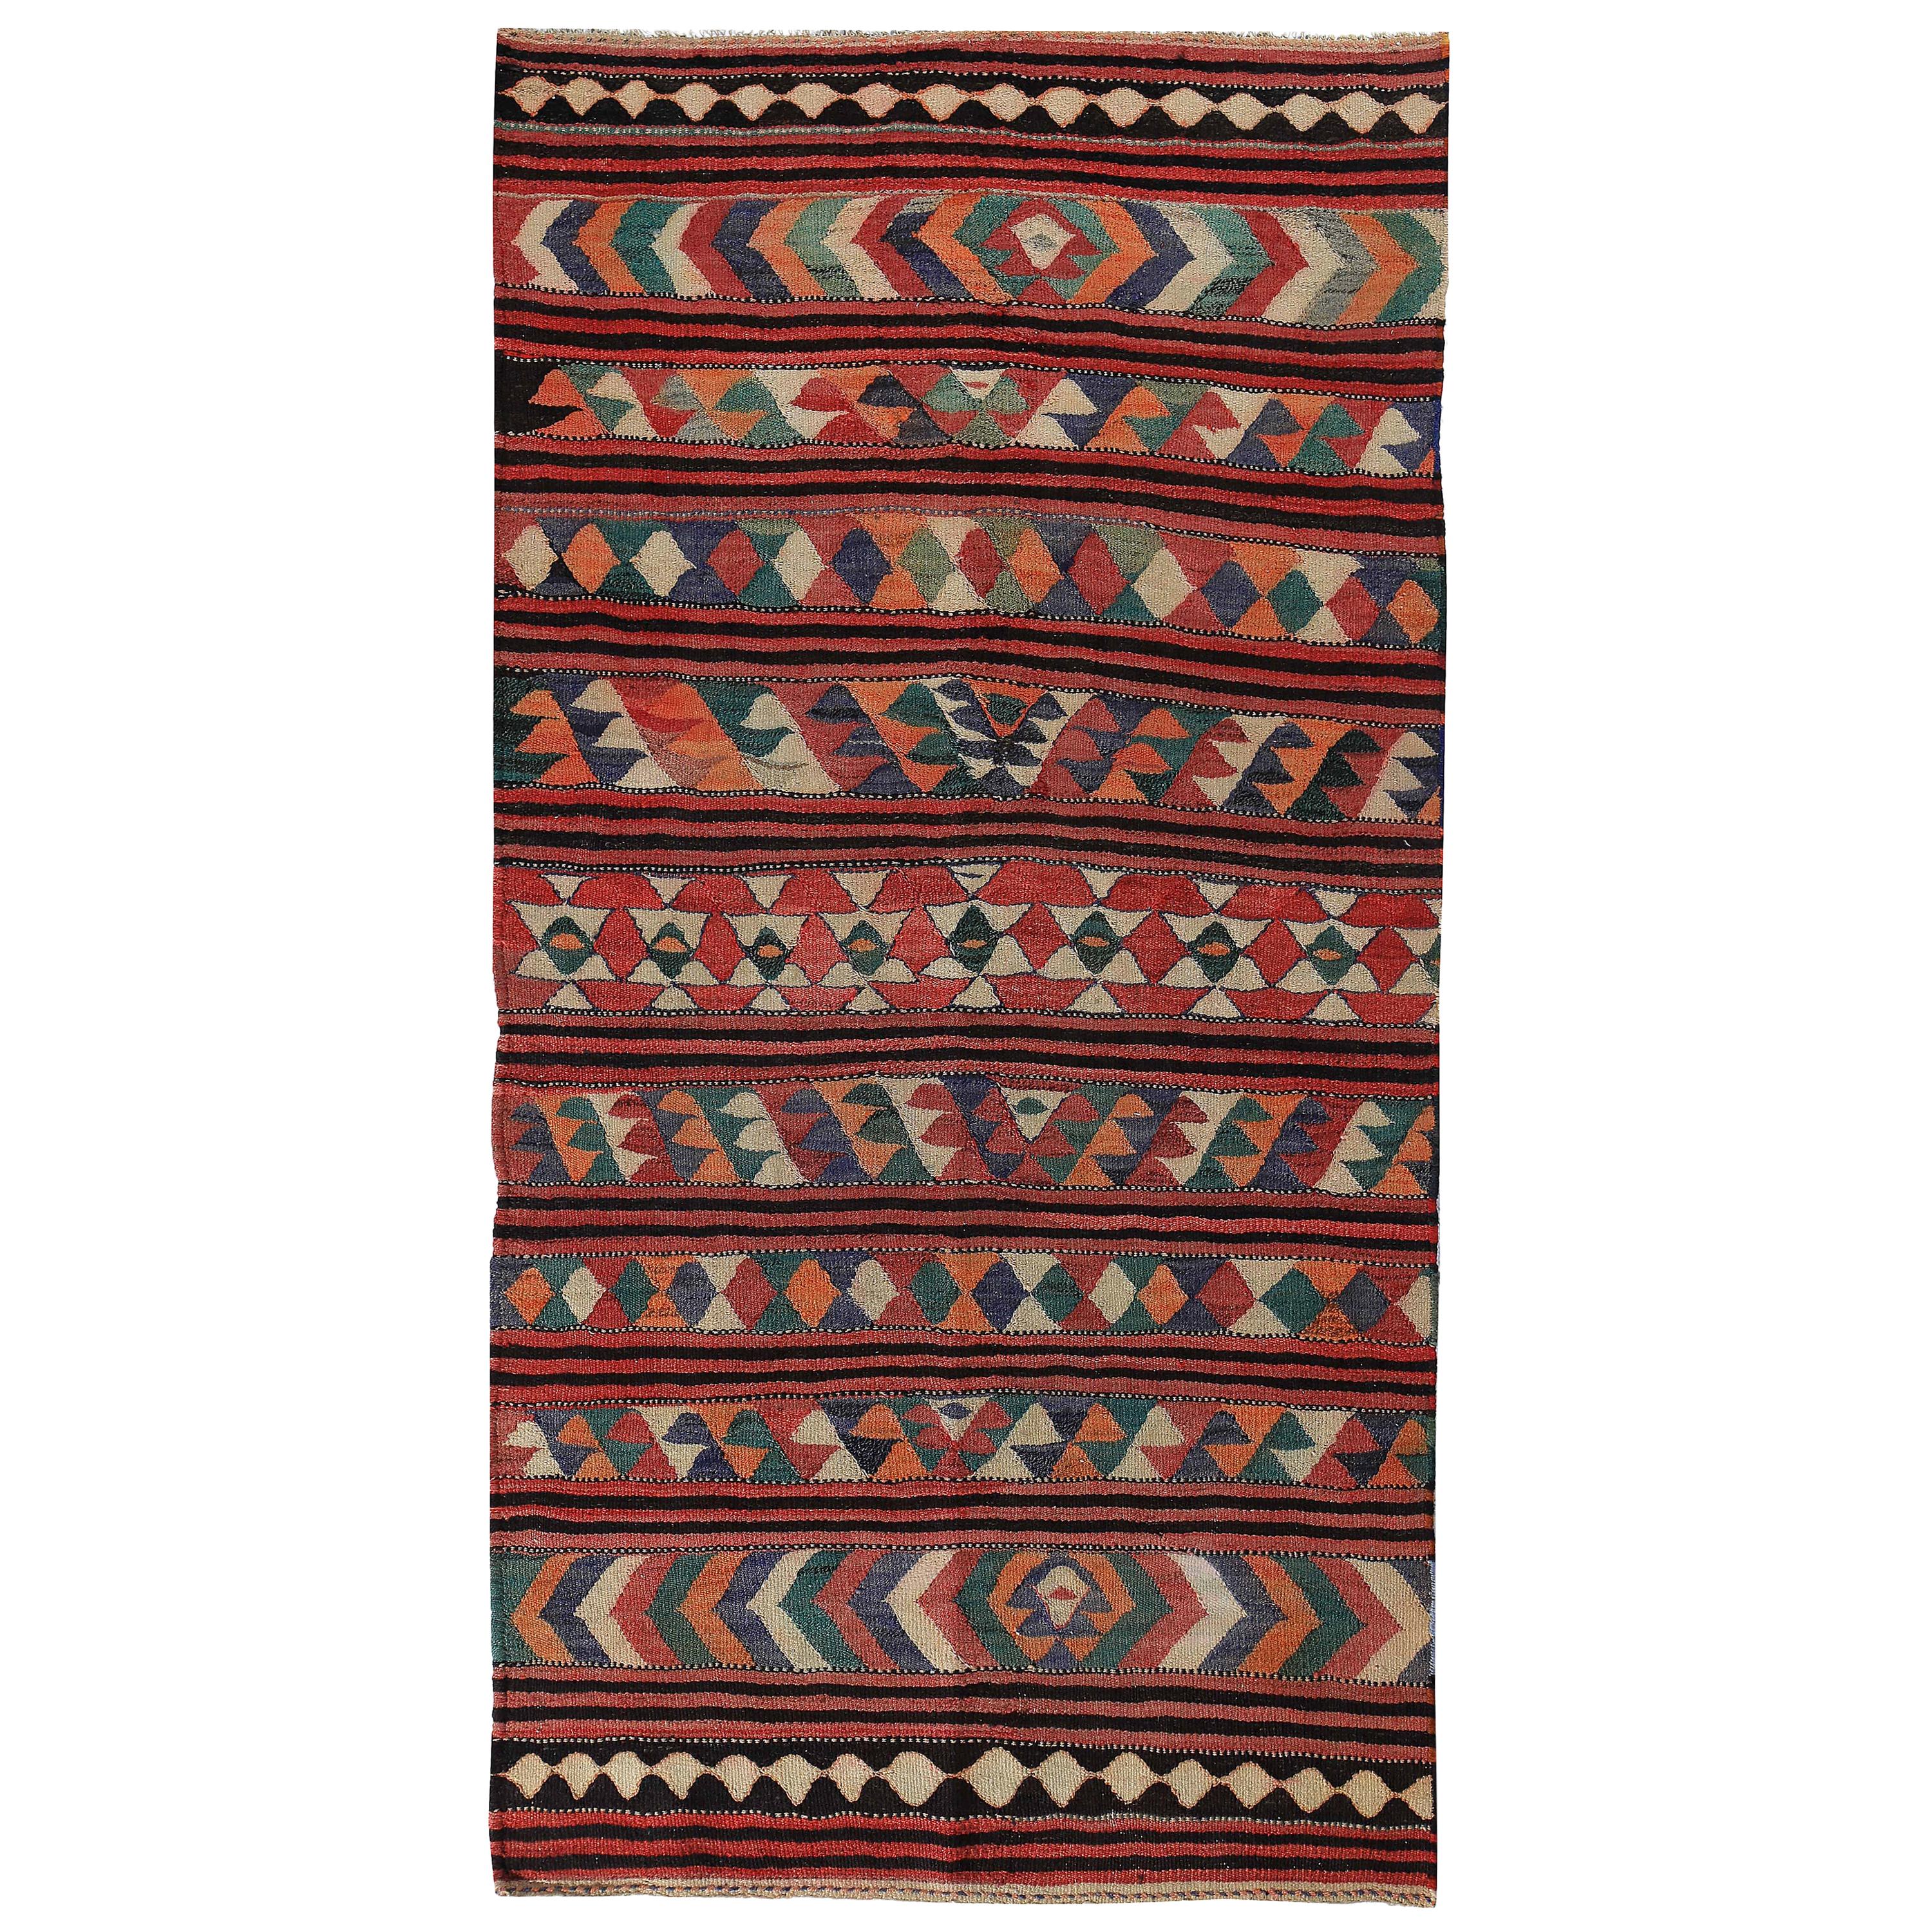 Modern Turkish Kilim Rug with Green and Navy Geometric Details on Red Field For Sale